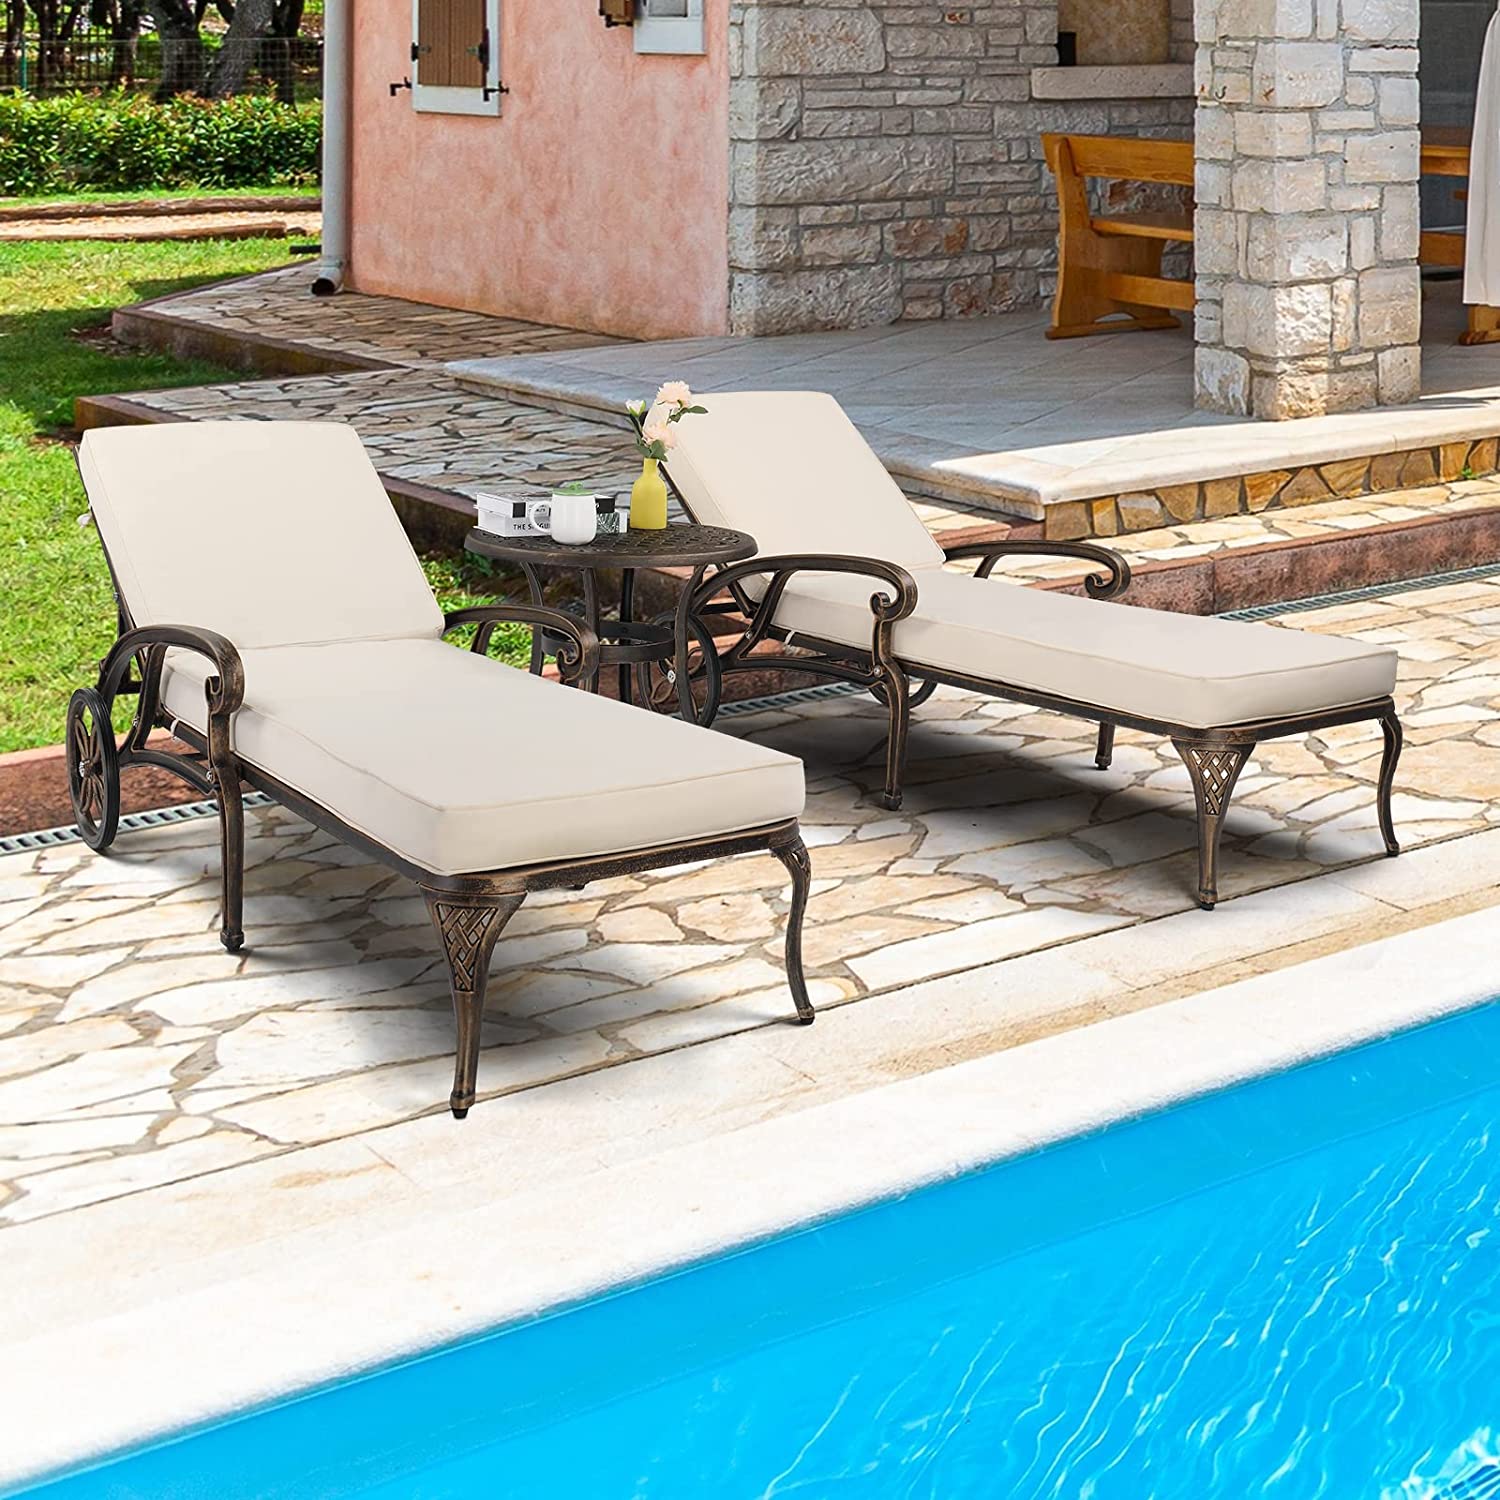 VINGLI Cast Aluminum Outdoor Chaise Lounge Chair with Wheels, Tanning Chair with 3-Position Adjustable Backrest, Patio Chaise Lounge Reclining Chair Poolside Lounge Chair(Bronze, with Cushion) - image 5 of 7